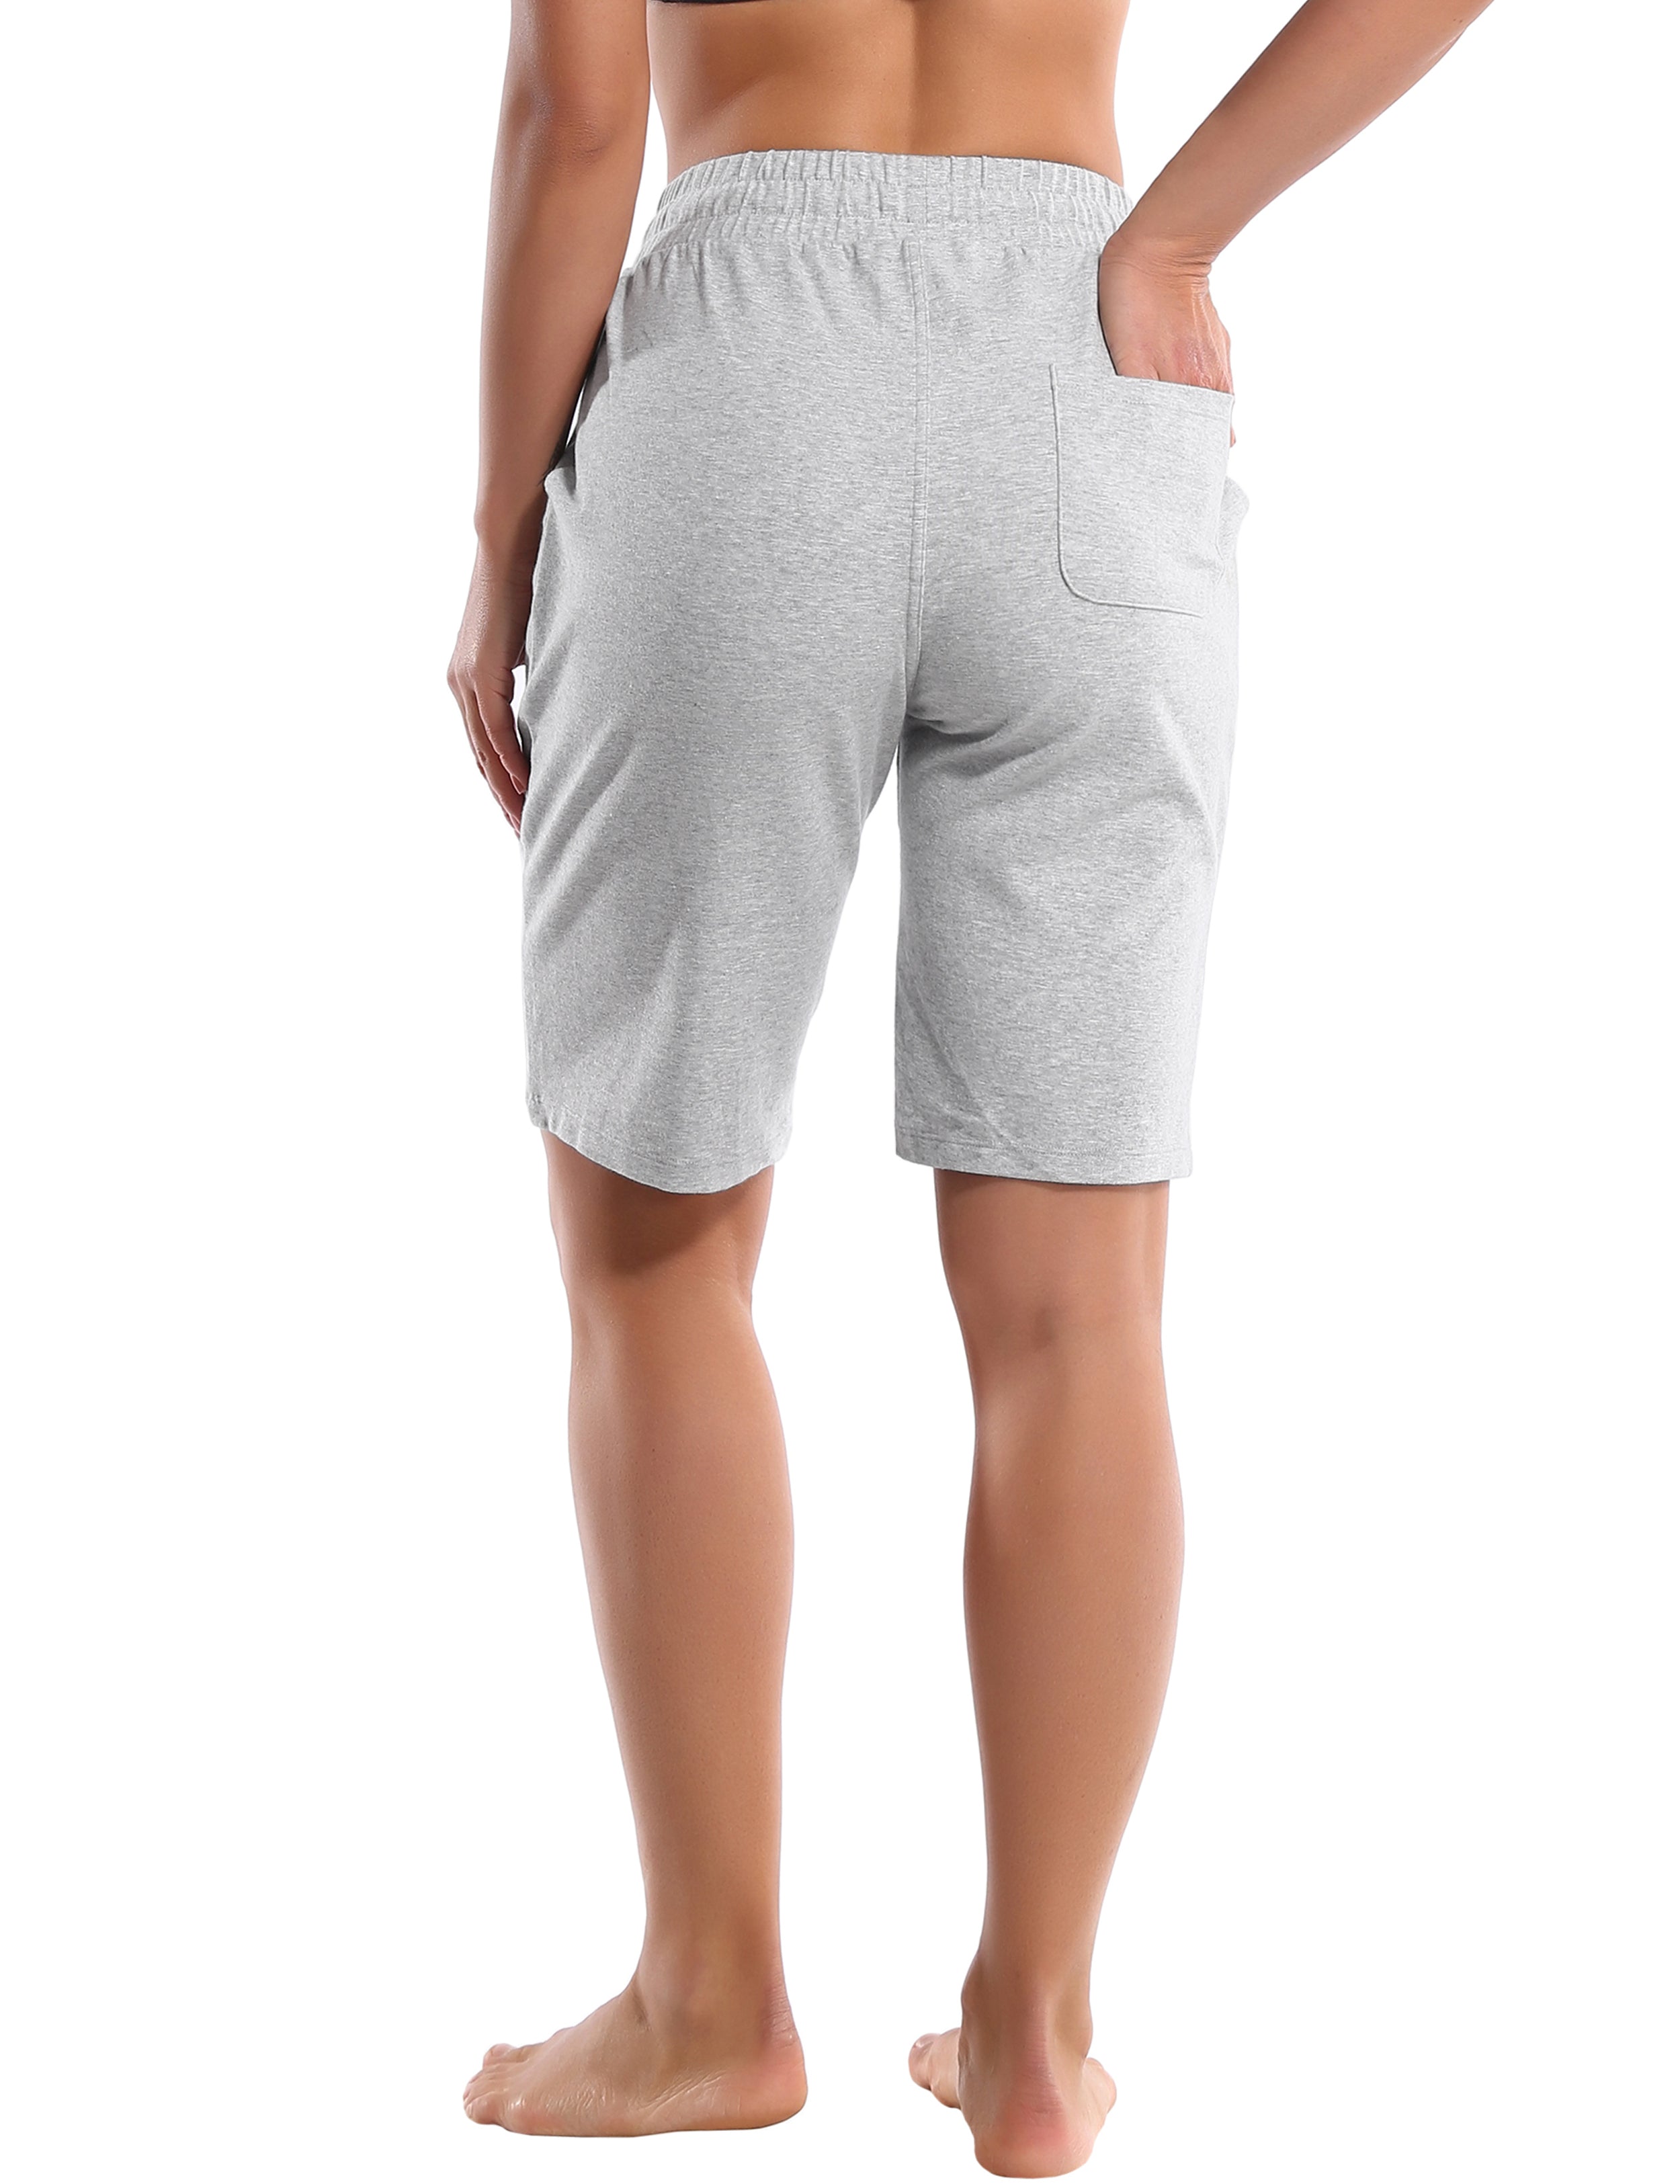 10" Joggers Shorts heathergray 90% Cotton, 10% Spandex Soft and Elastic Drawstring closure Lightweight & breathable fabric wicks away sweat to keep you comfortable Elastic waistband with internal drawcord for a snug, adjustable fit Big side pockets are available for 4.7", 5", 5.5" mobile phone Reflective logo helps you stand out in low light Perfect for any types of outdoor exercises and indoor fitness,like Biking,running,walking,jogging,lounging,workout,gym fitness,casual use,etc